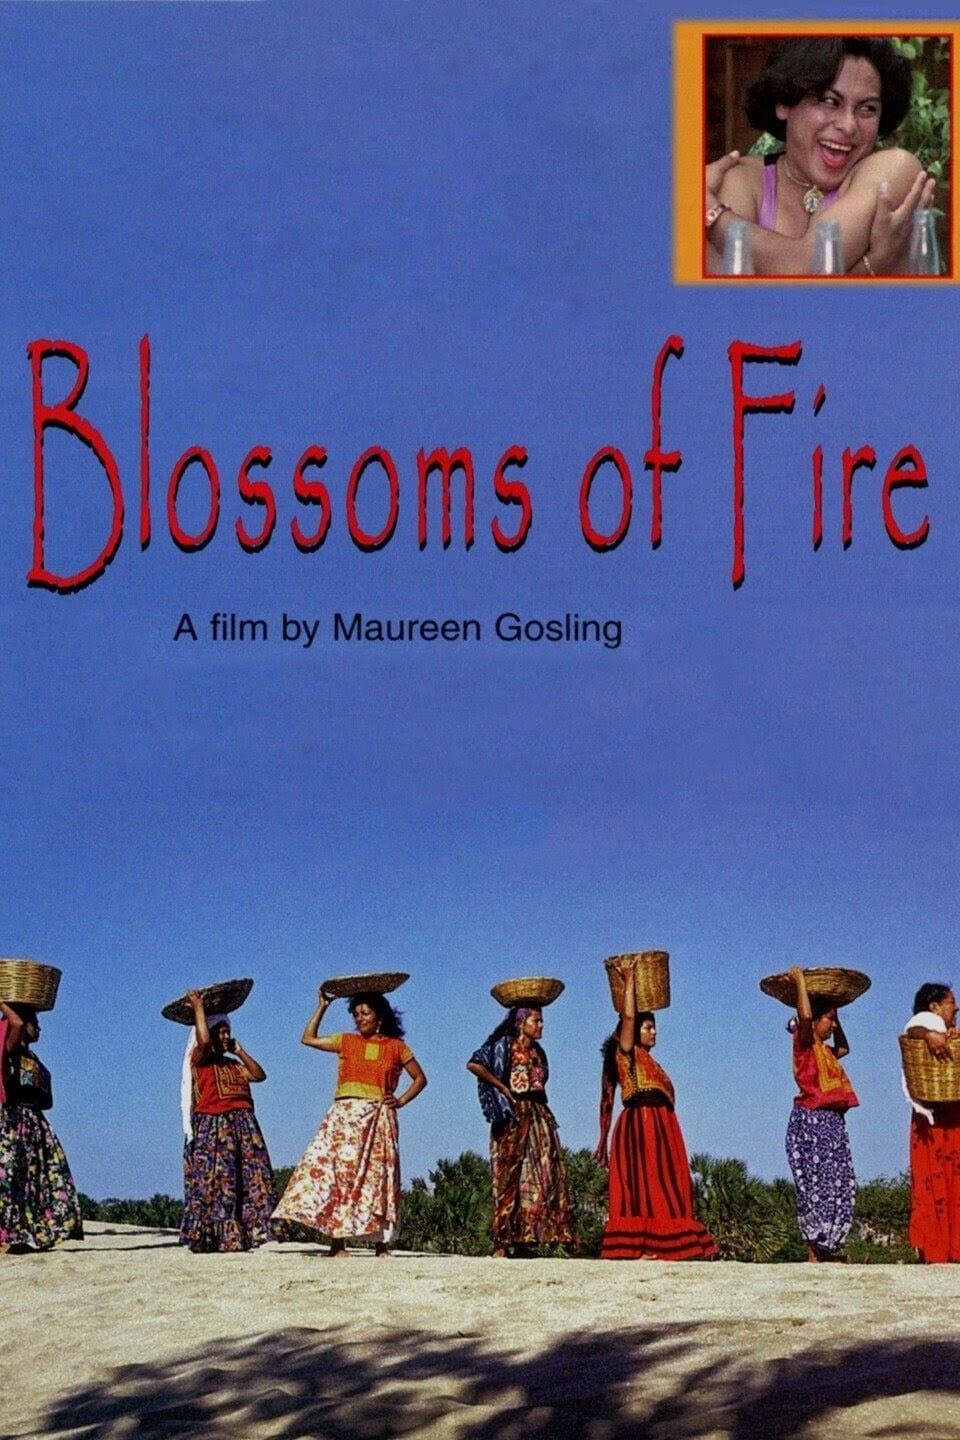 Blossoms of Fire